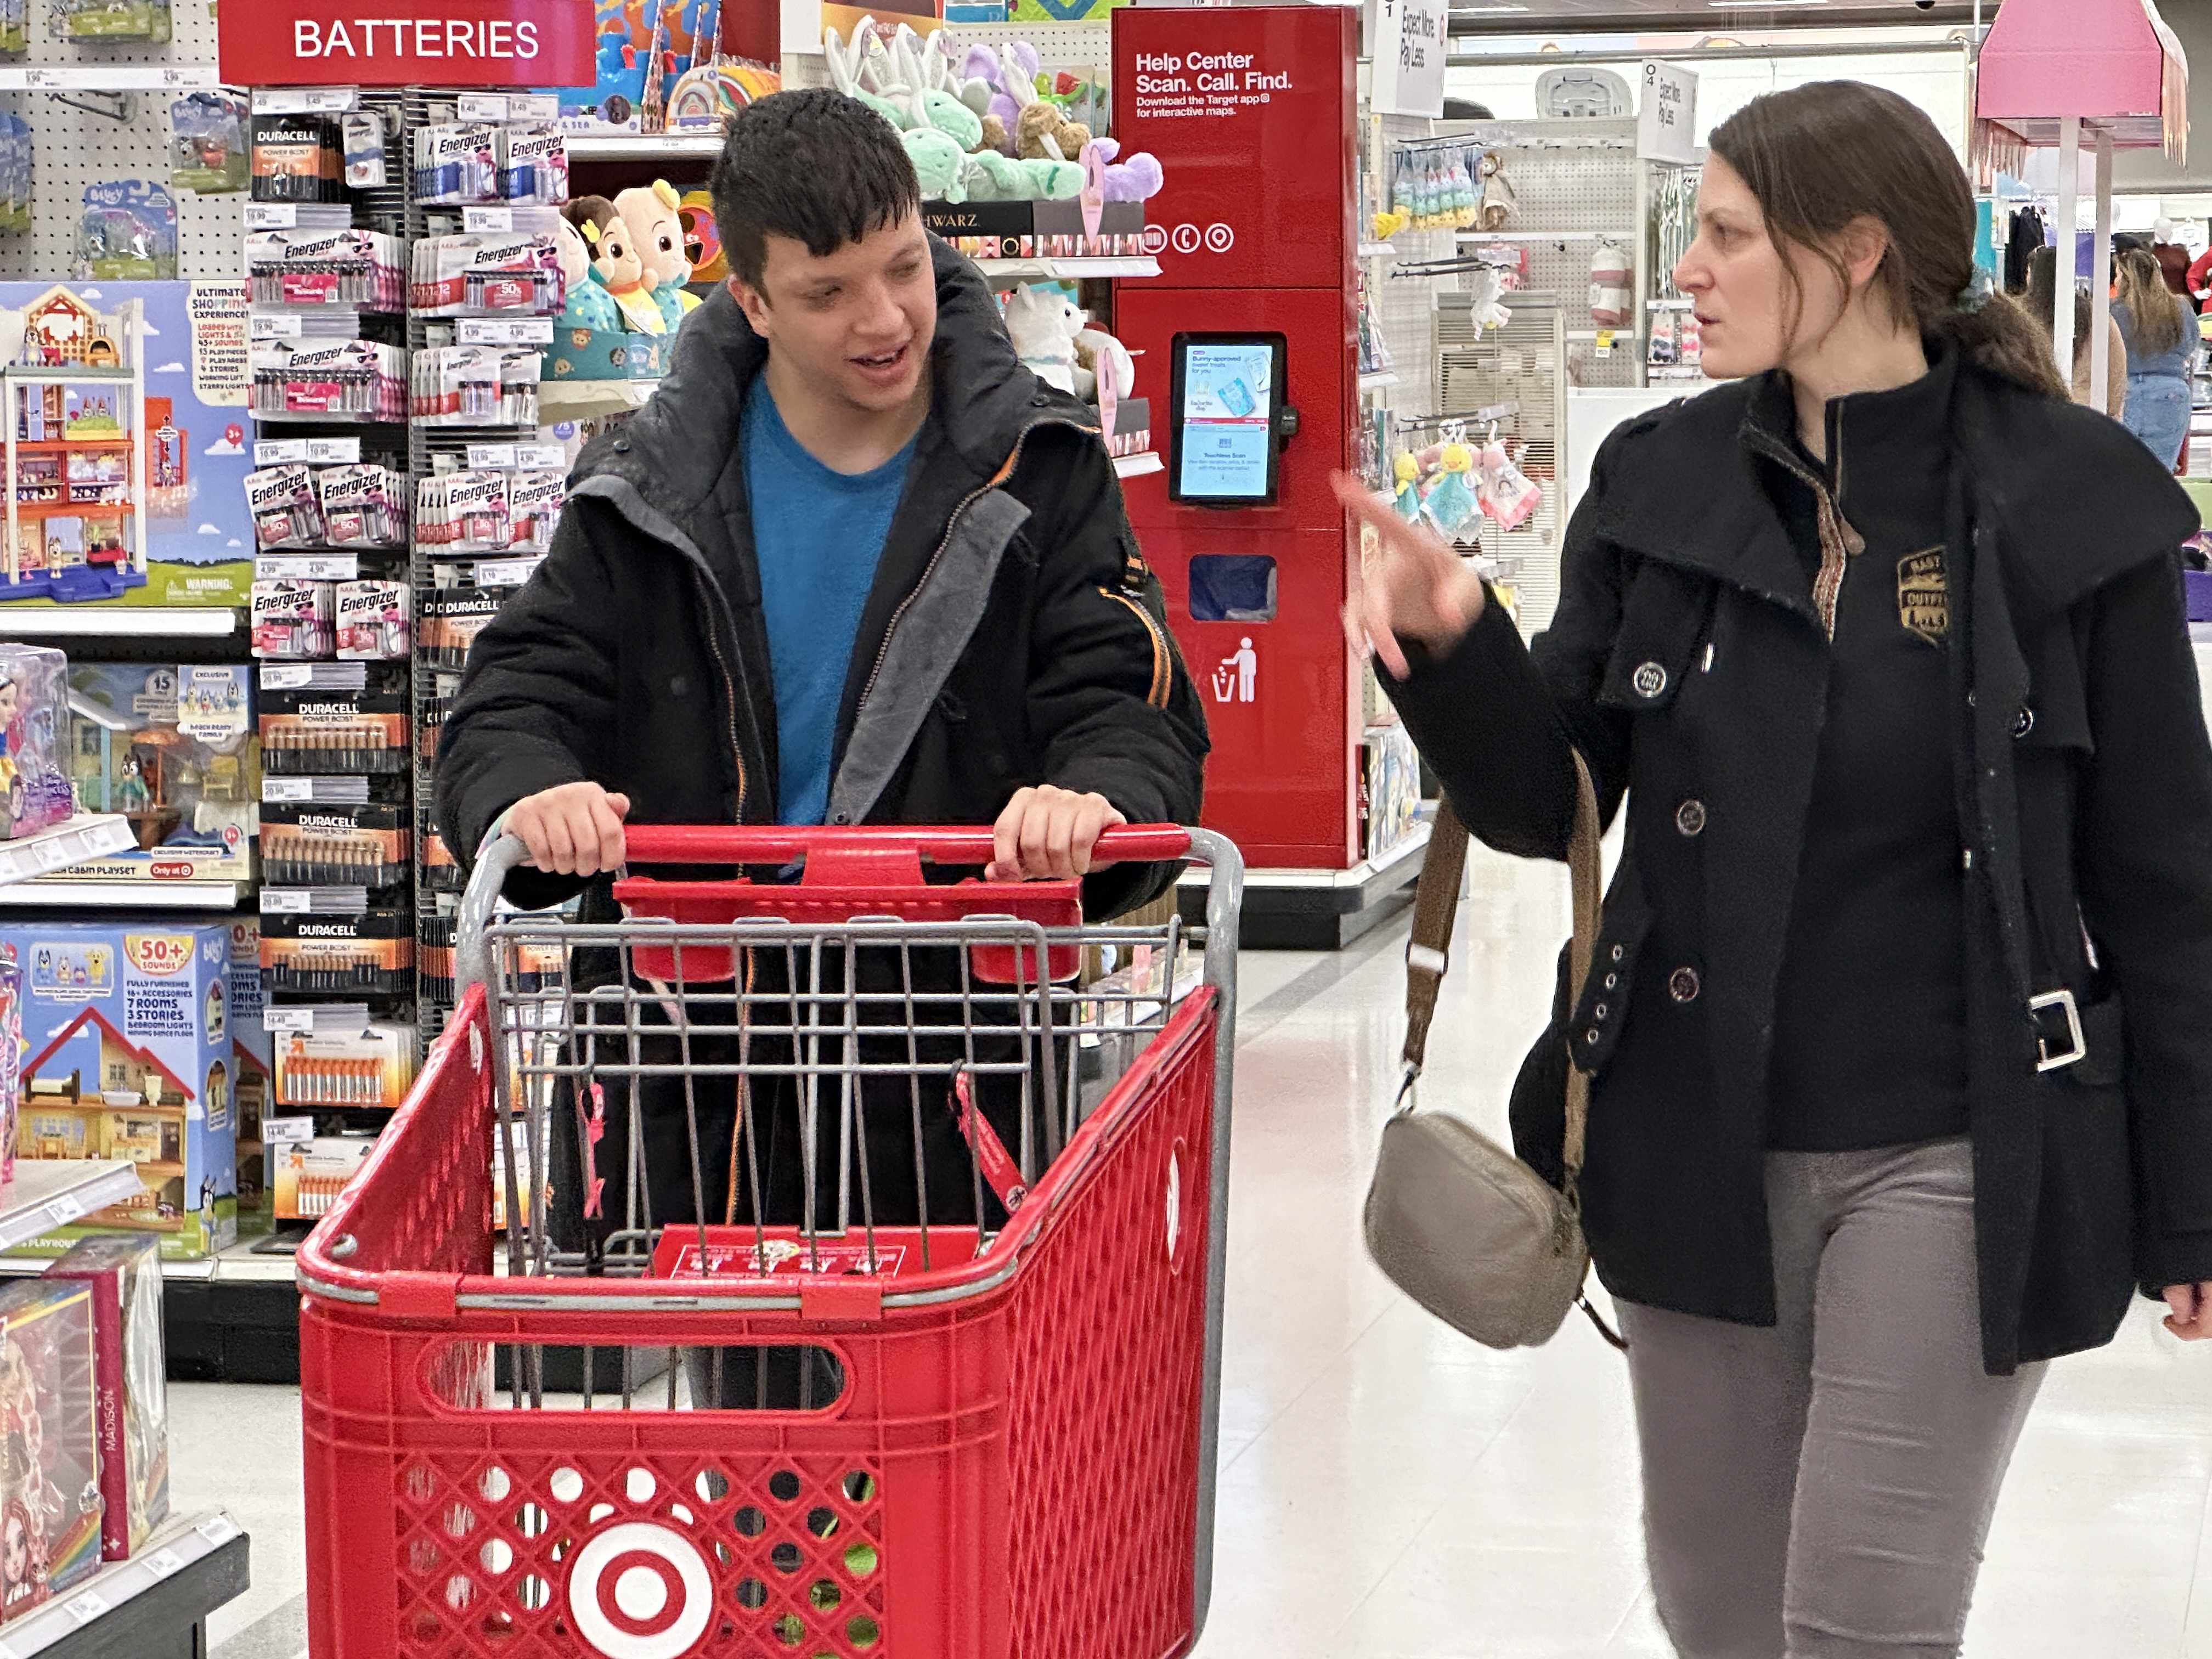 Hunter pushes a cart in Target while Alyson walks beside him